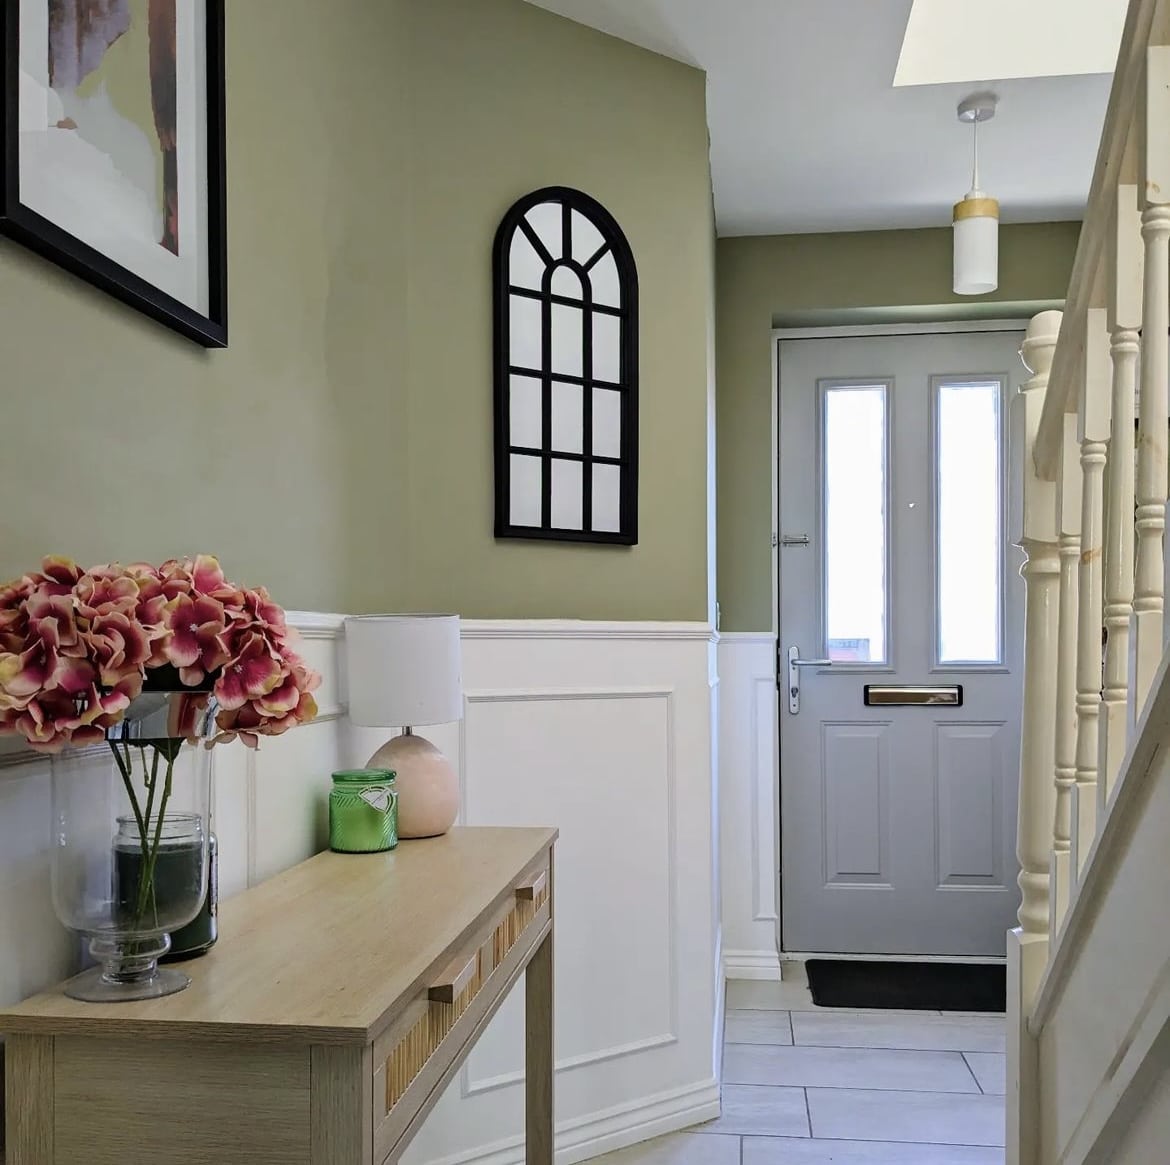 Dulux overtly olive